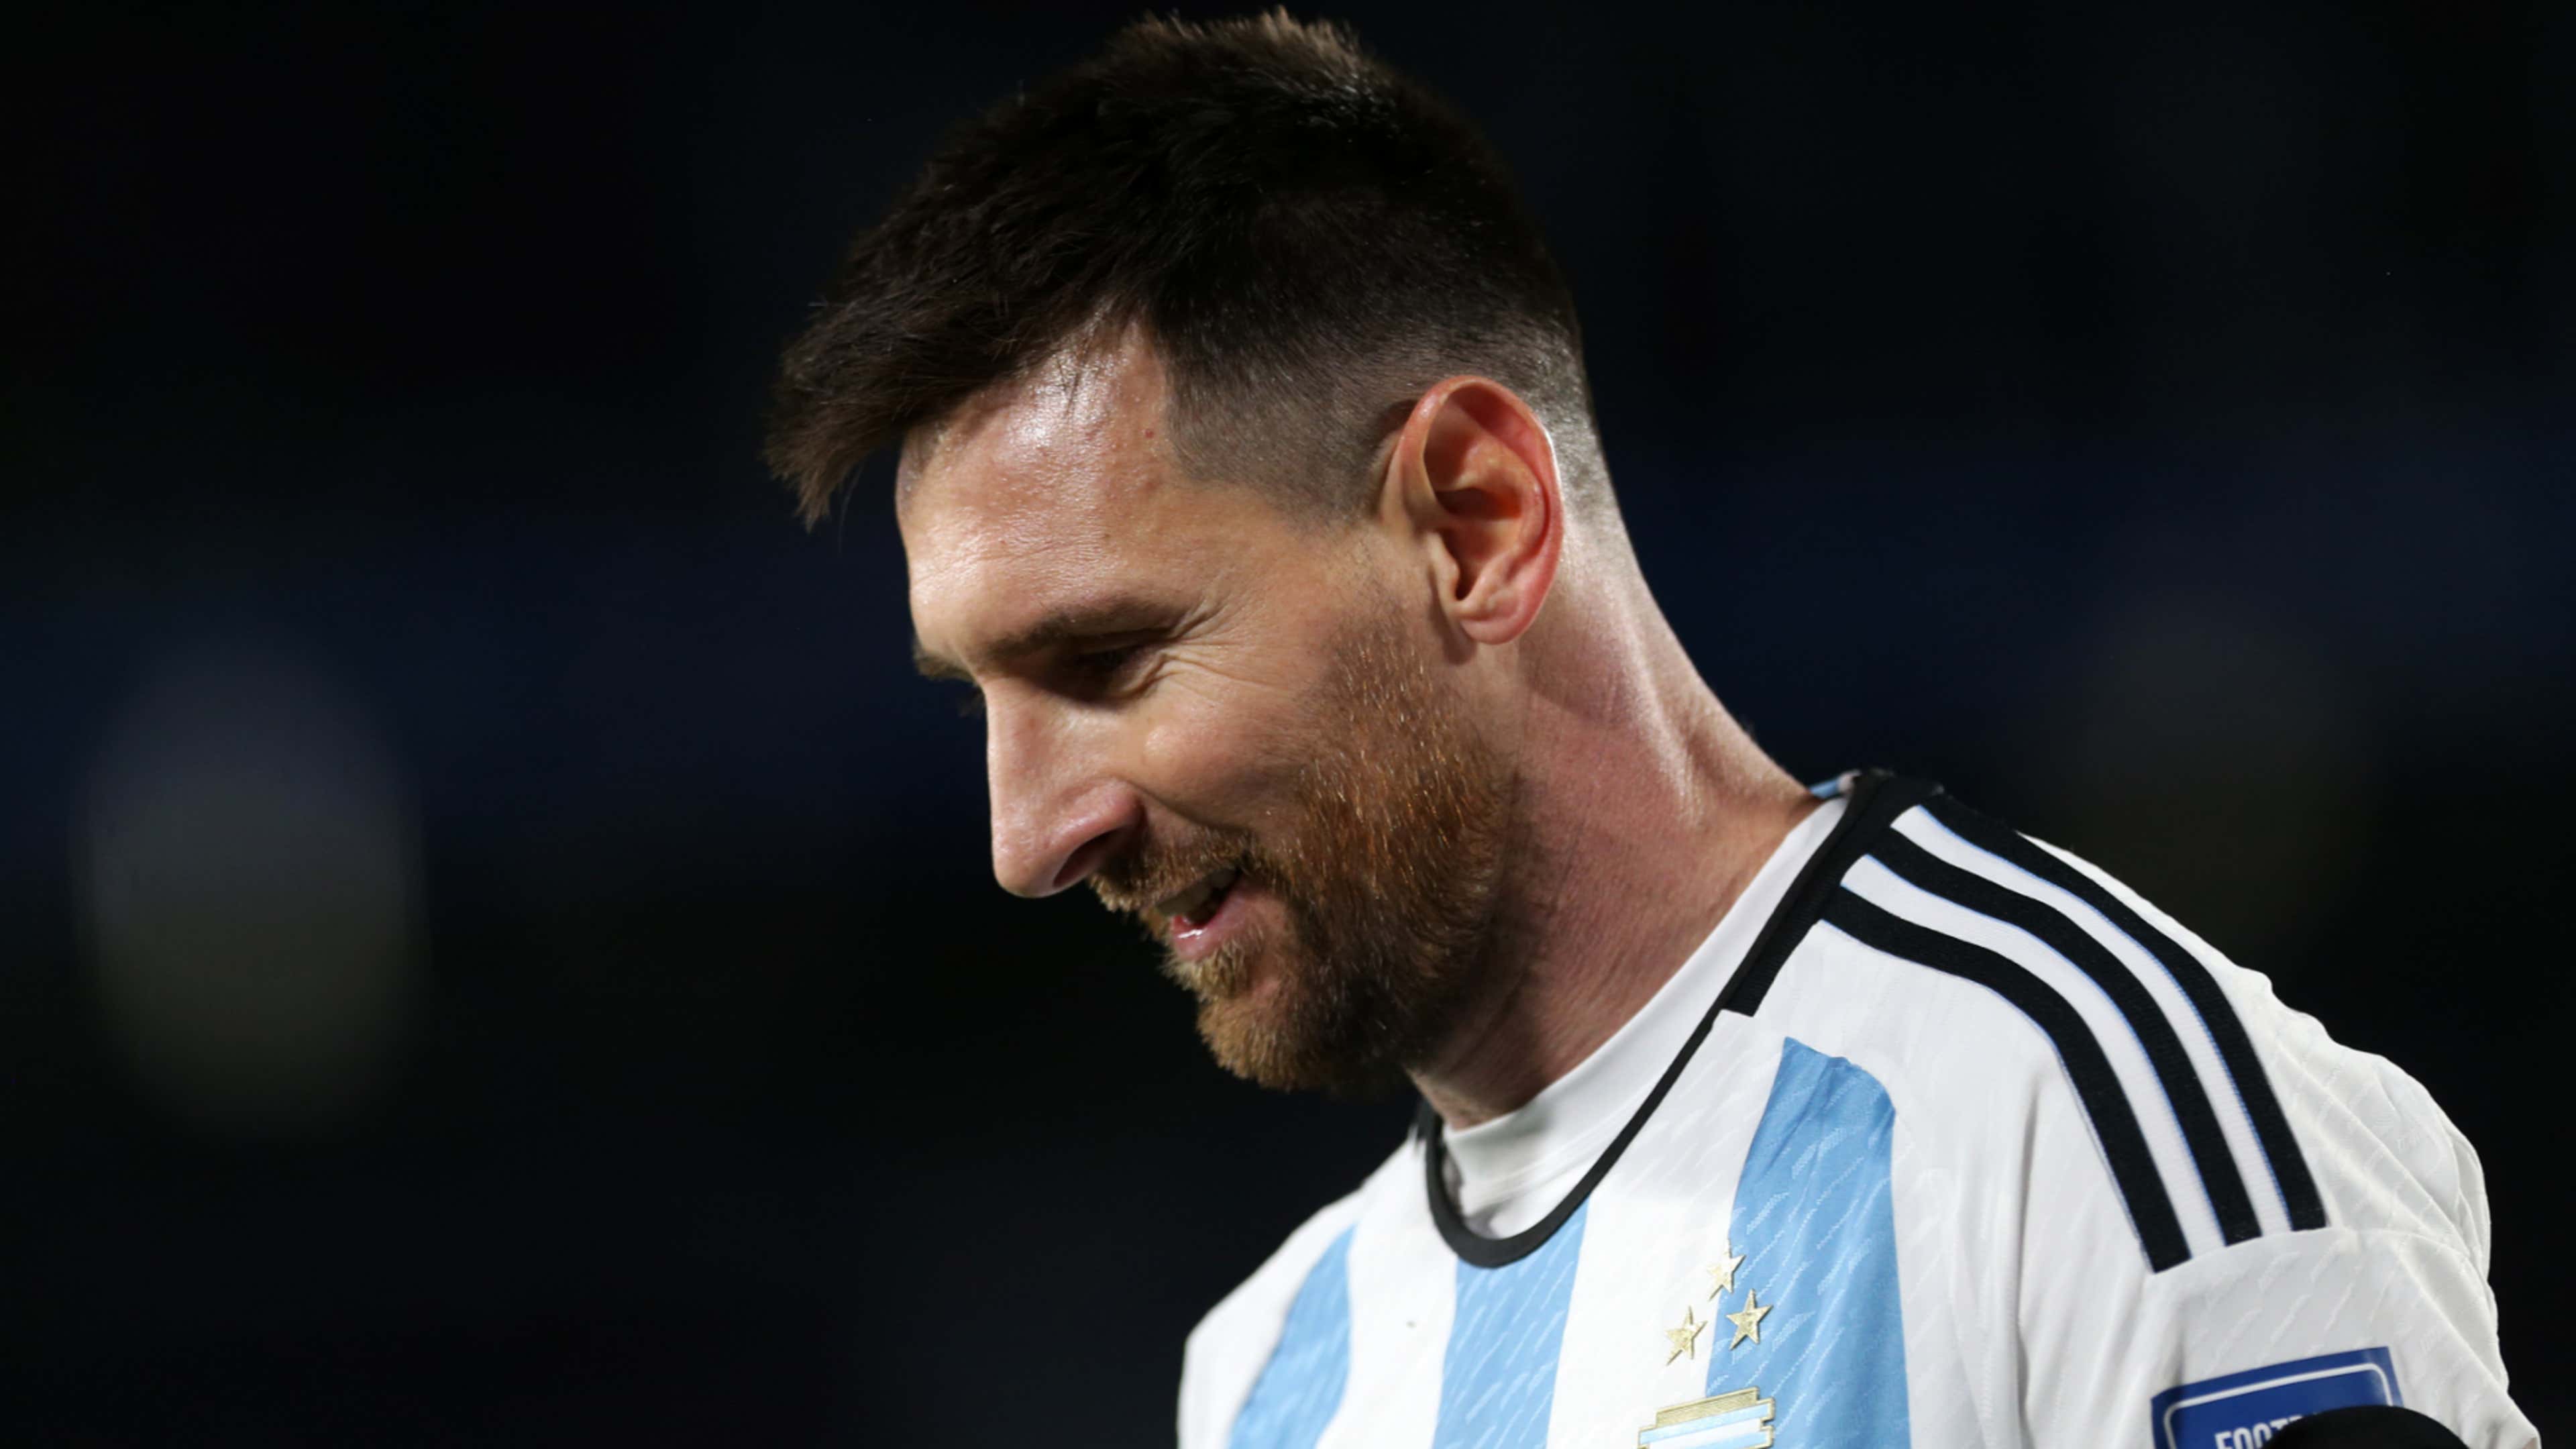 FIFA World Cup 2022: How to livestream Argentina vs France finals on TV,  Android and iOS mobile phones